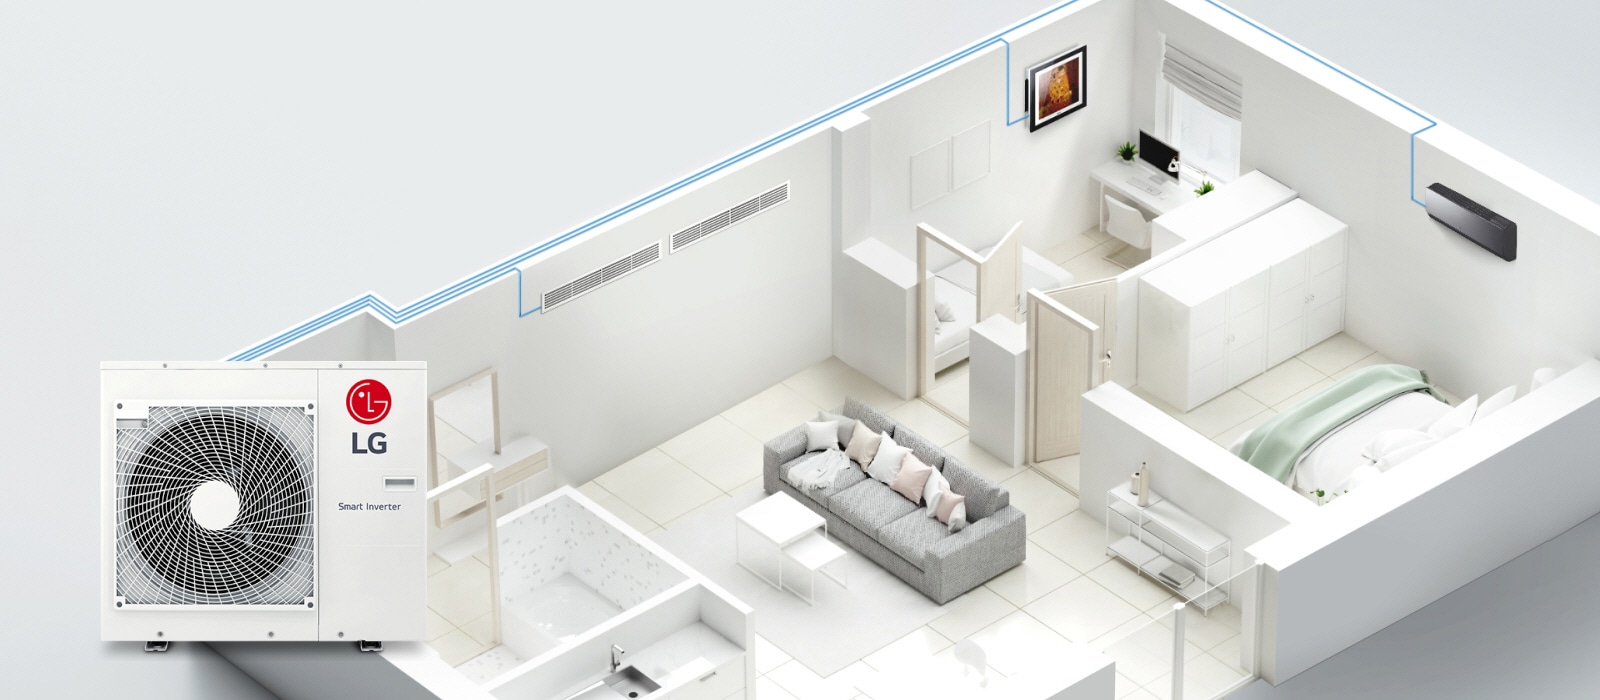 A sectional view of the house reveals blue pipelines from an LG Smart Inverter unit weaving around the house, linking three indoor units in each room.